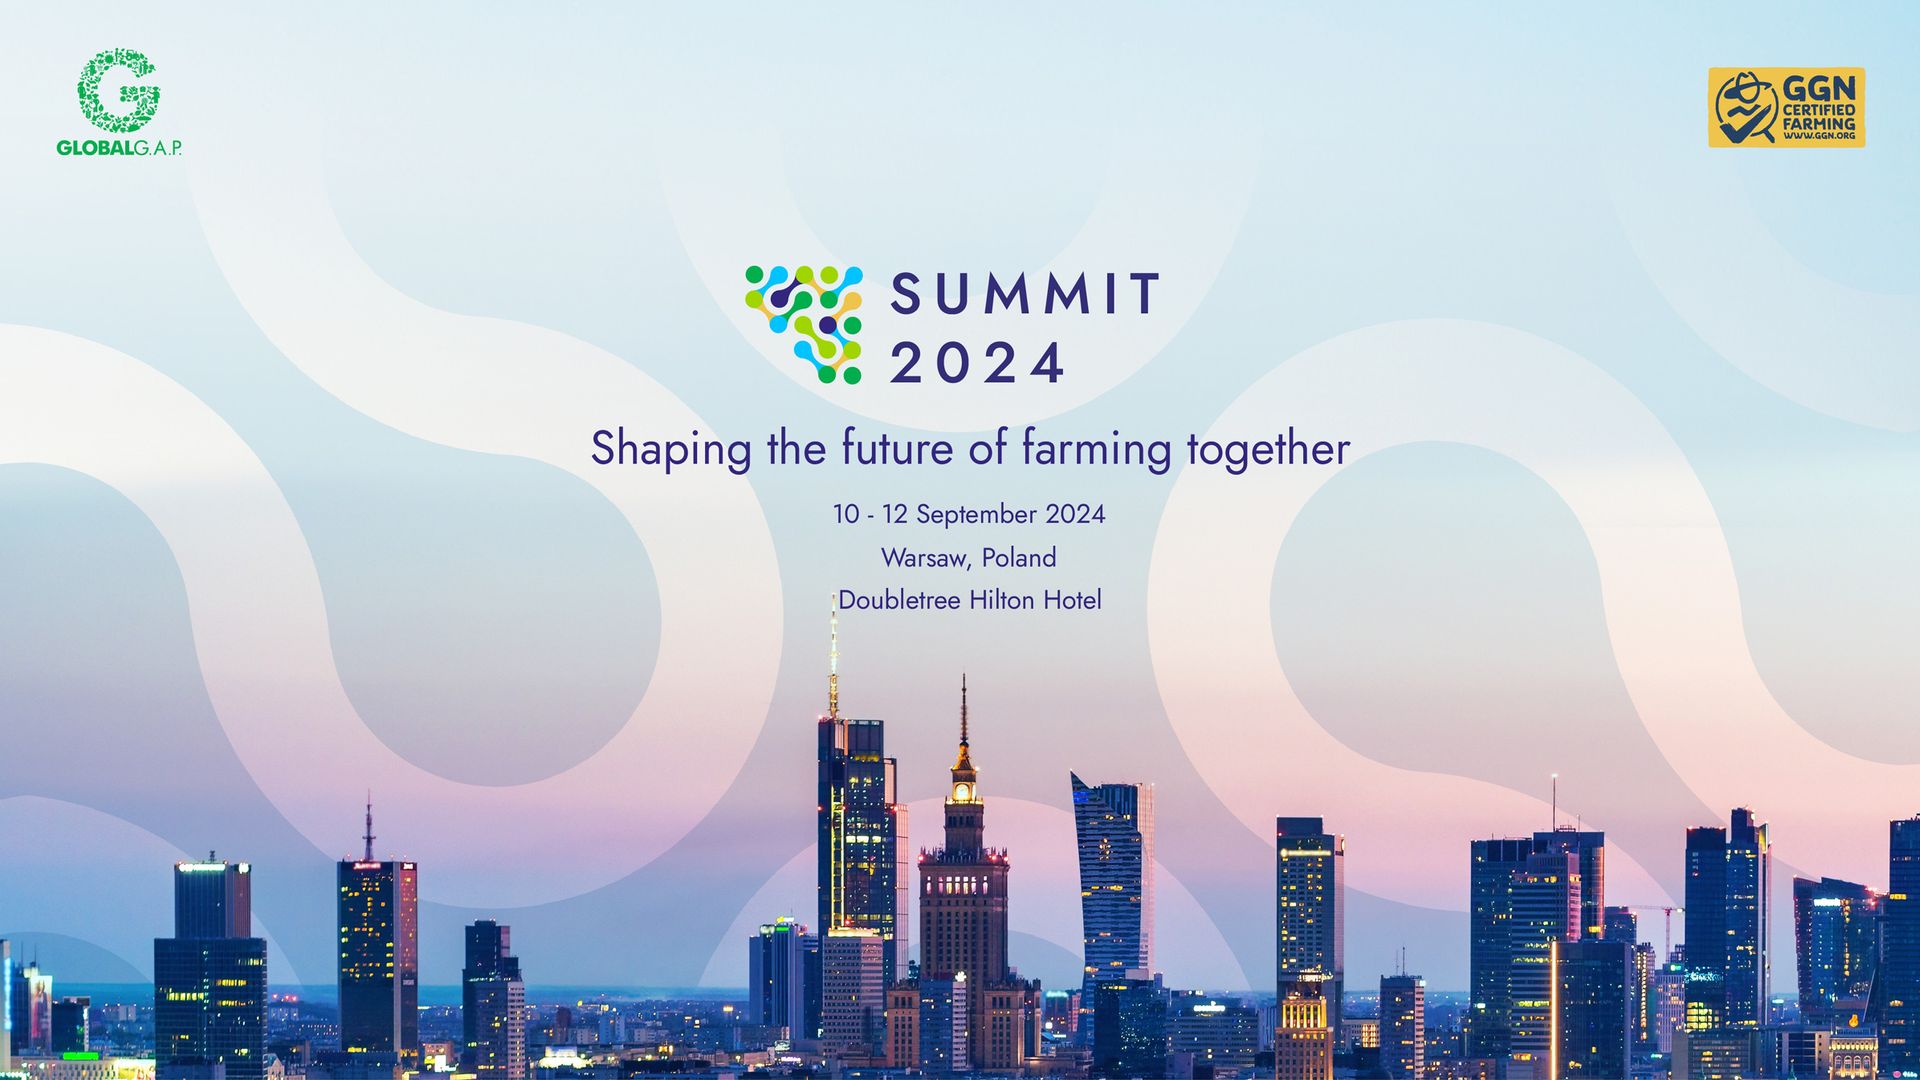 A promotional banner for Summit 2024 - Shaping the future of farming together, 10-12 September 2024, Warsaw, Poland